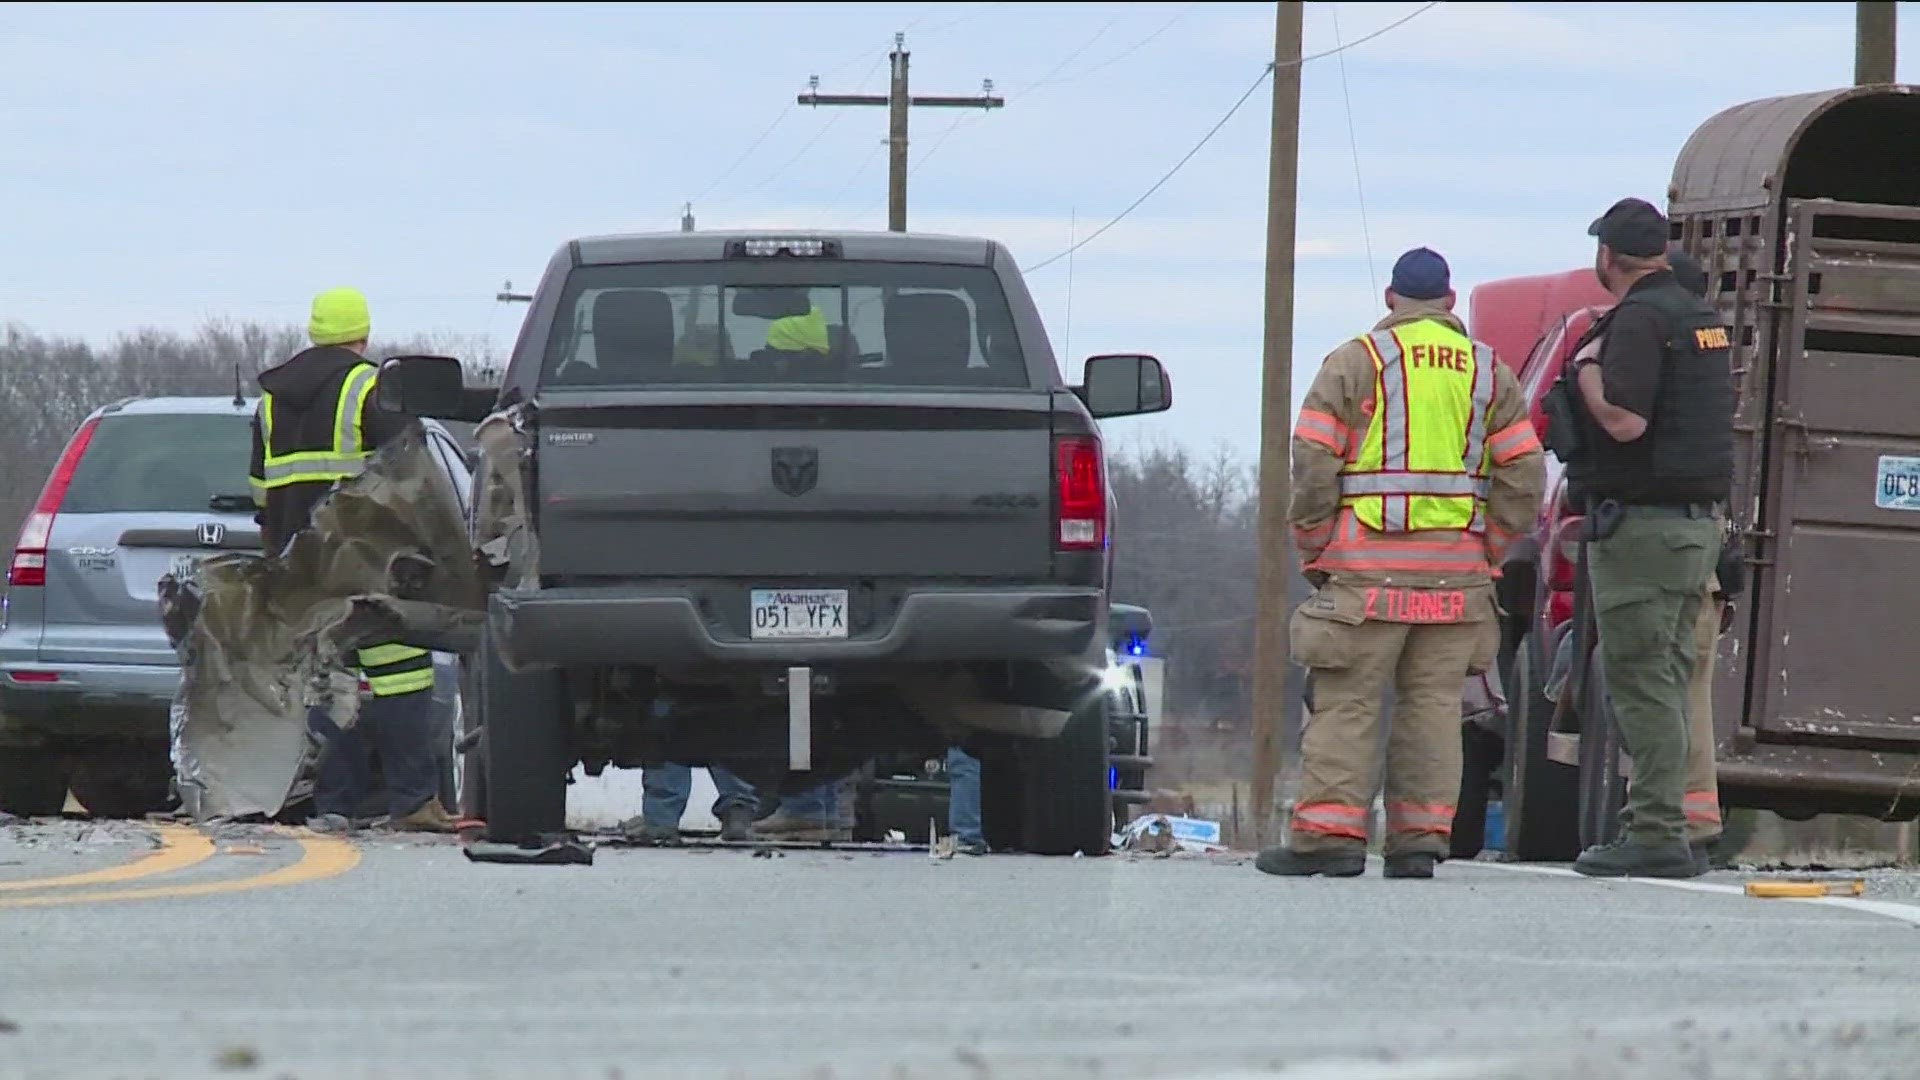 Christopher Derossett, 40, of Siloam Springs died from injuries sustained in the crash.